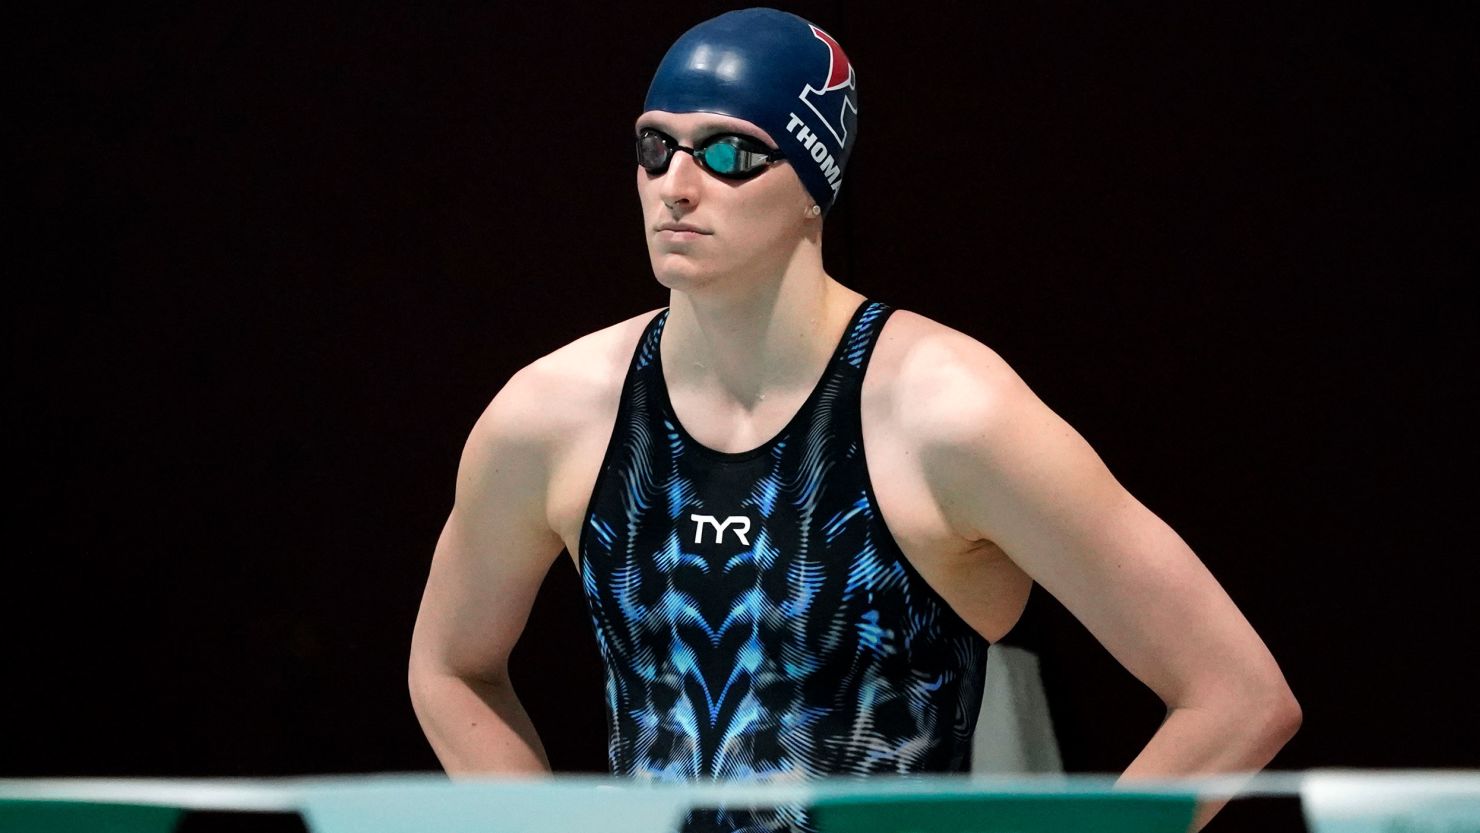 Lia Thomas How an Ivy League swimmer became the face of the debate on